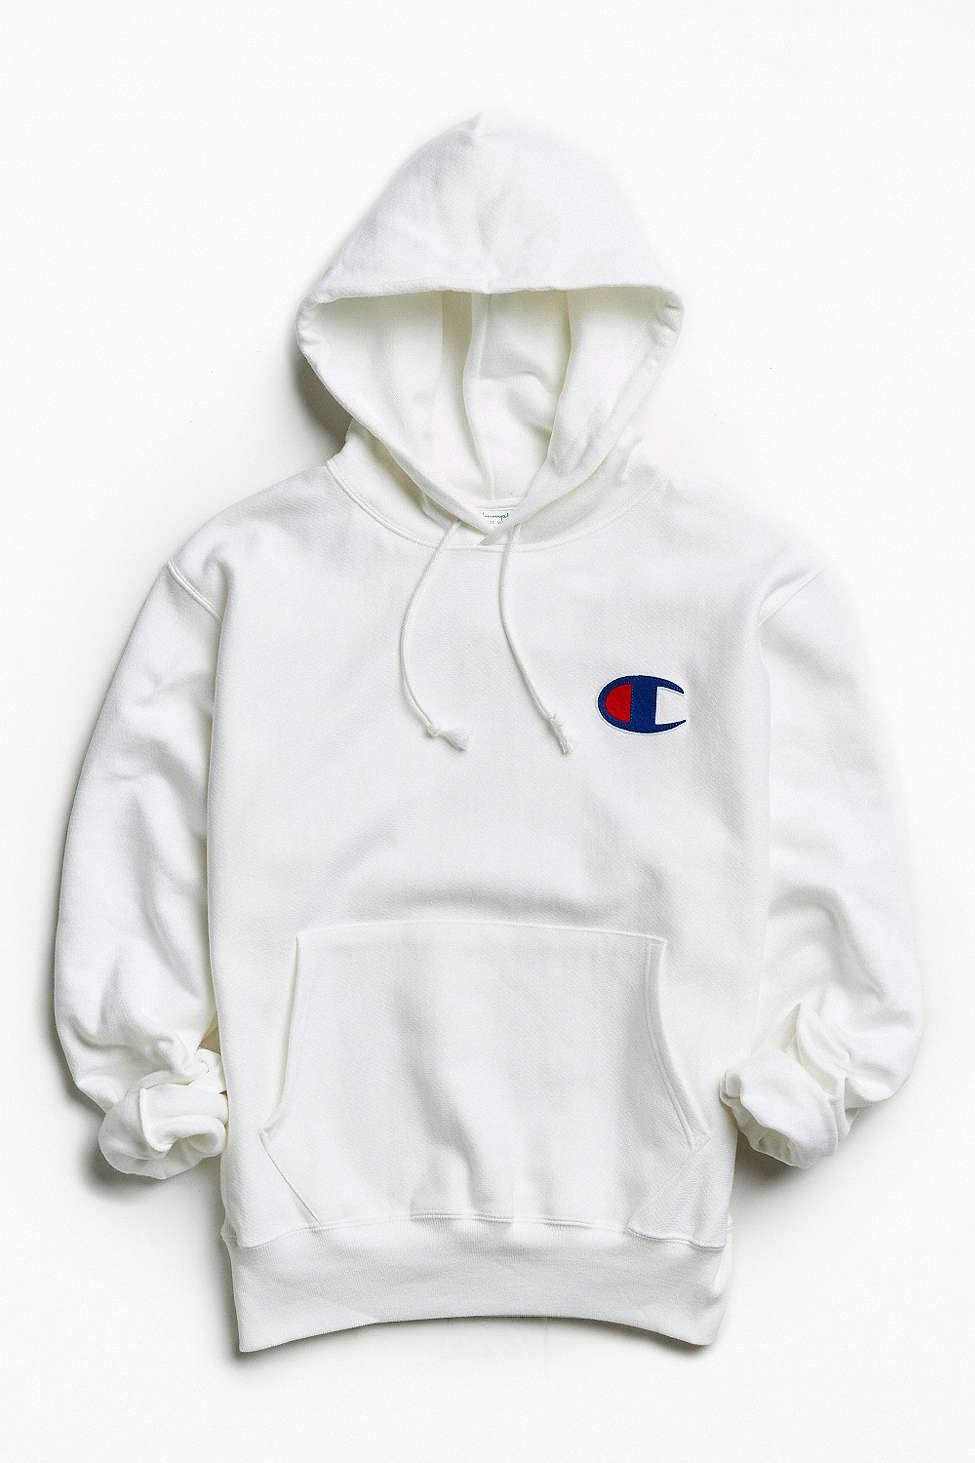 stores that sell champion hoodies near me